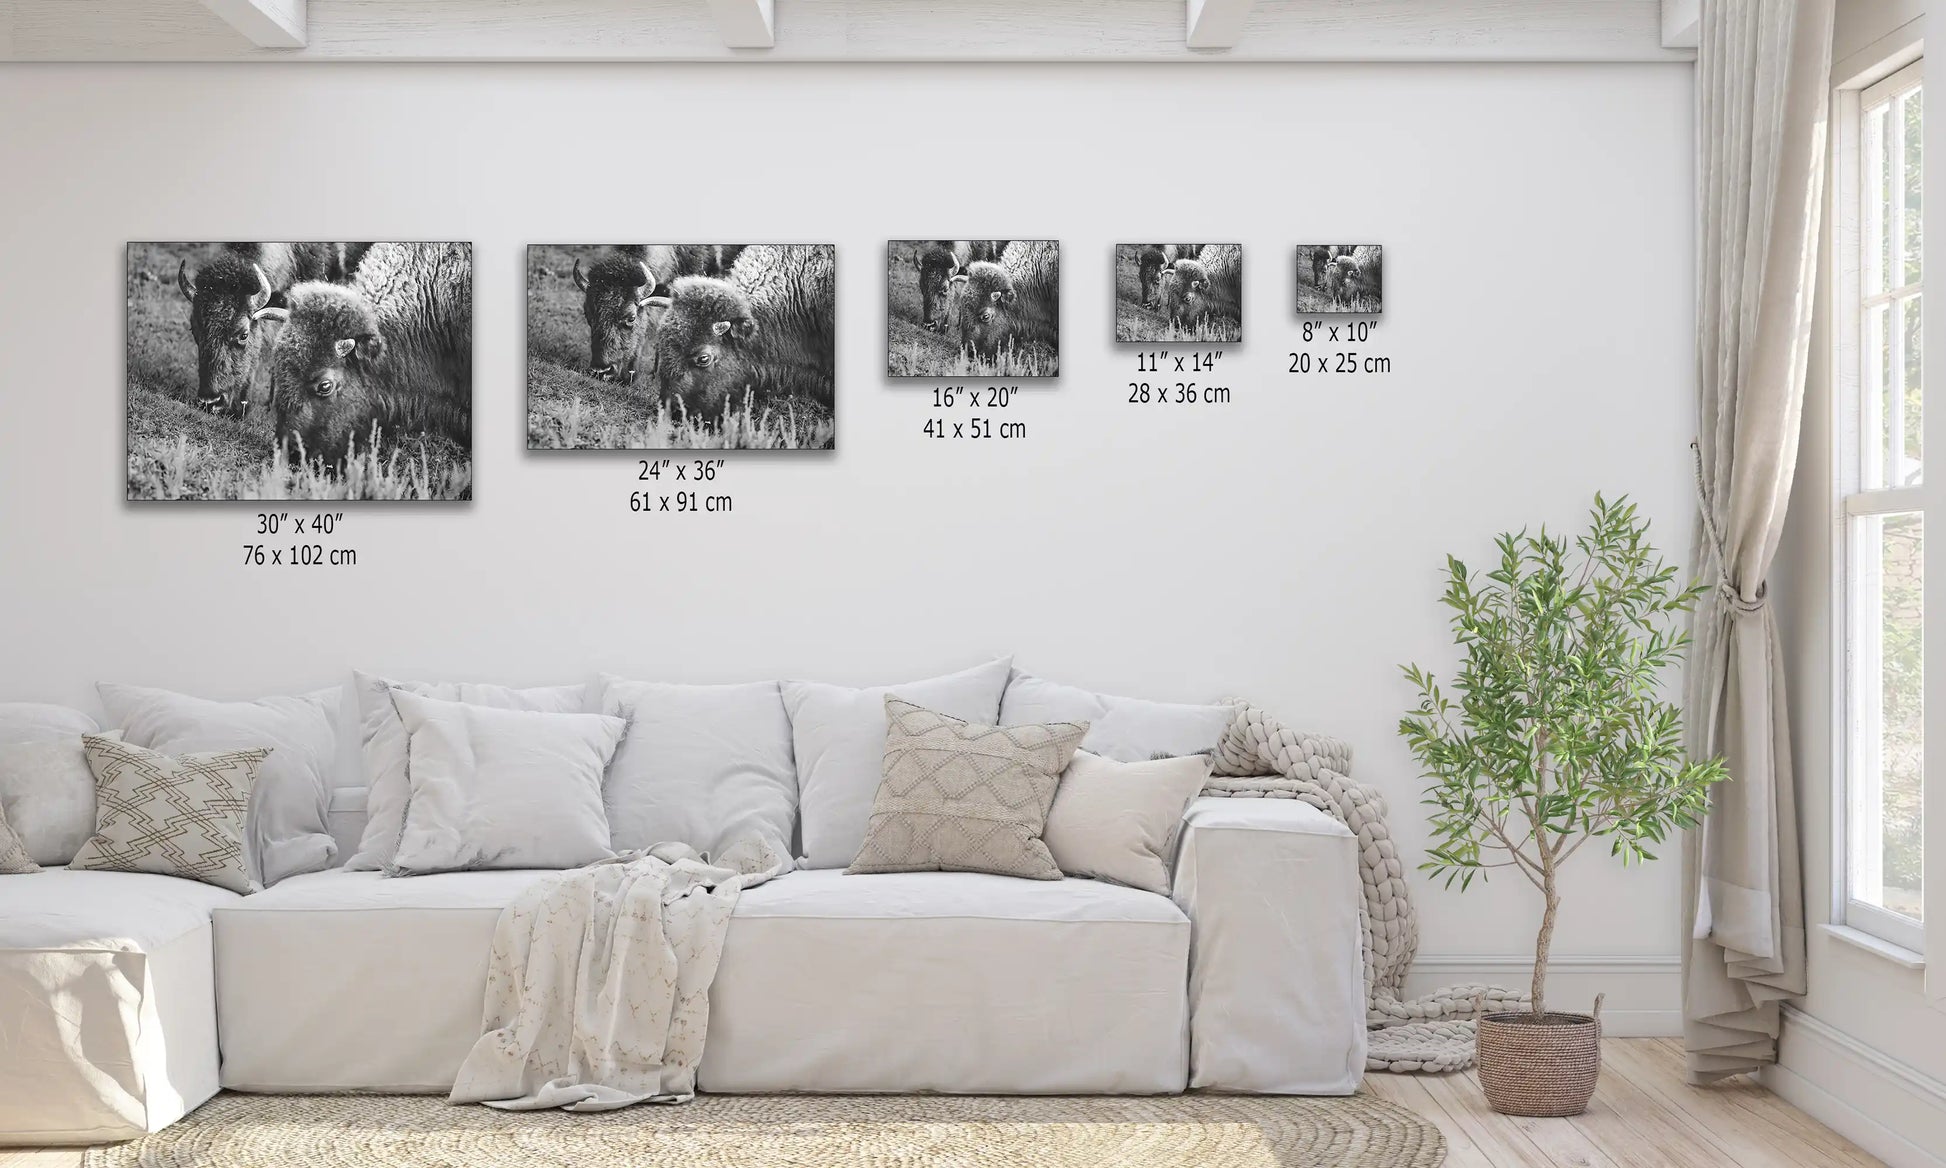 A collection of black and white canvas prints of bison in various sizes displayed over a couch for size comparison.